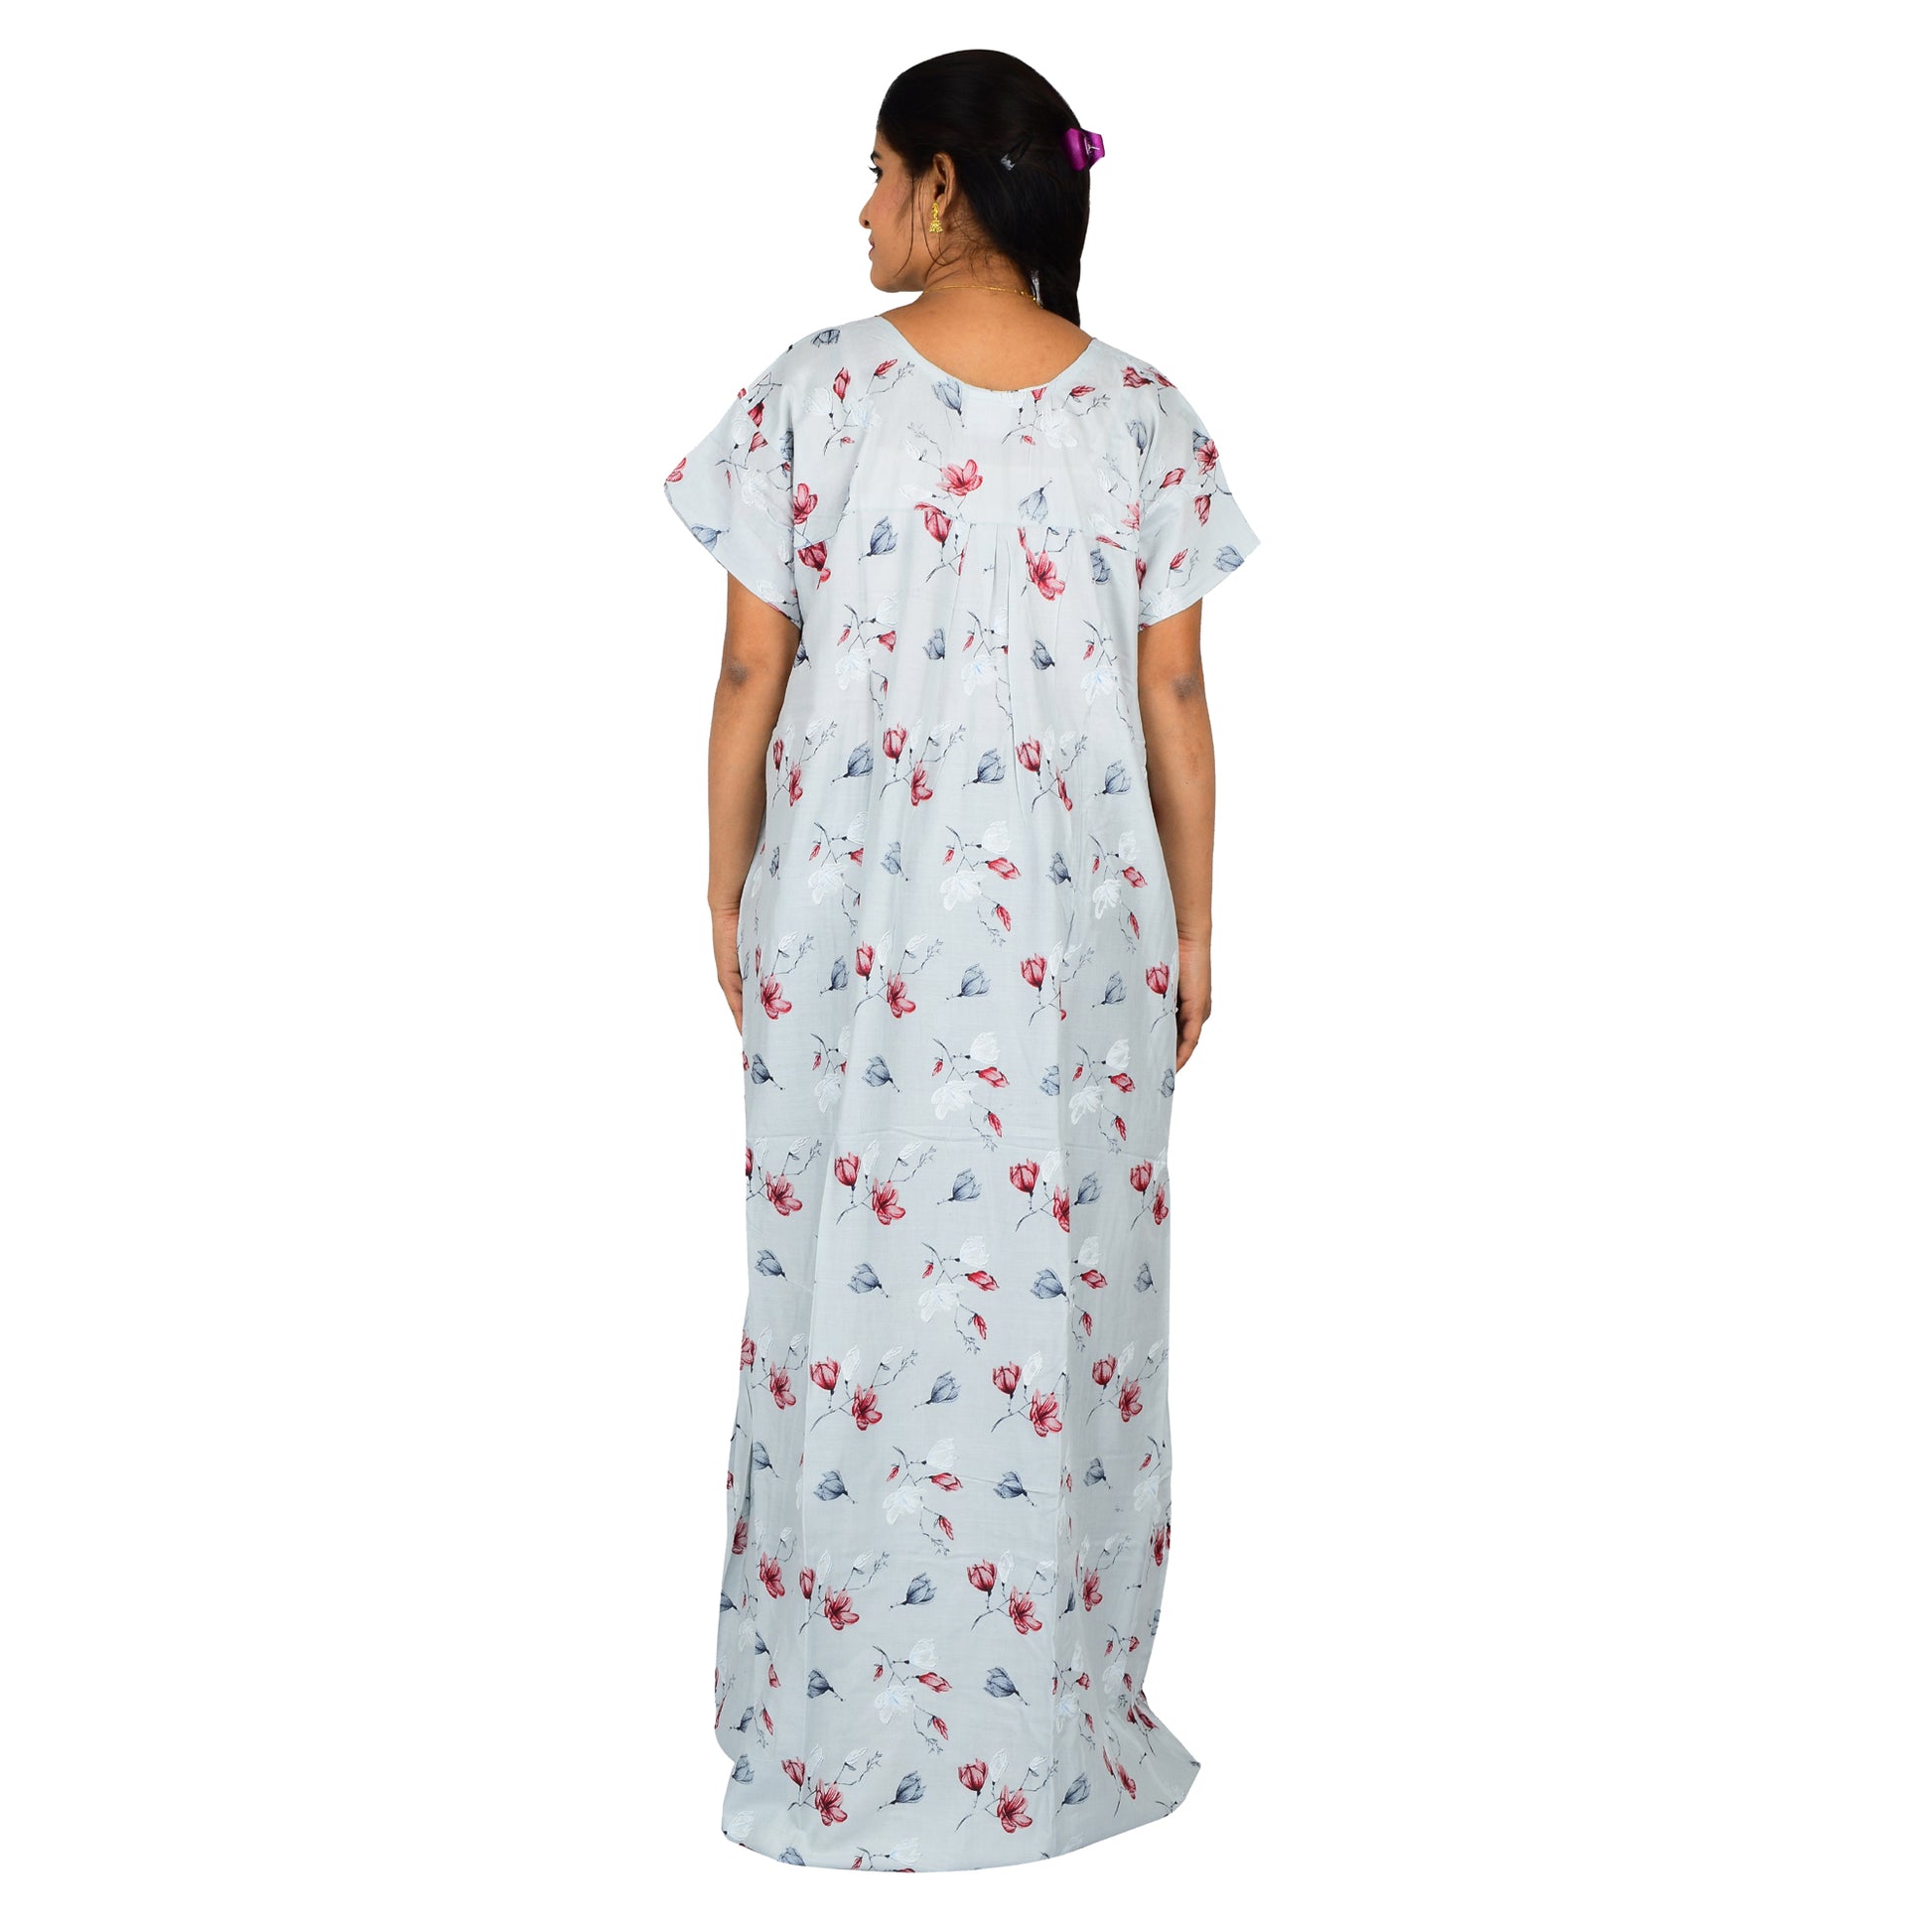 Printed Rayon Nighty For Women - Blue